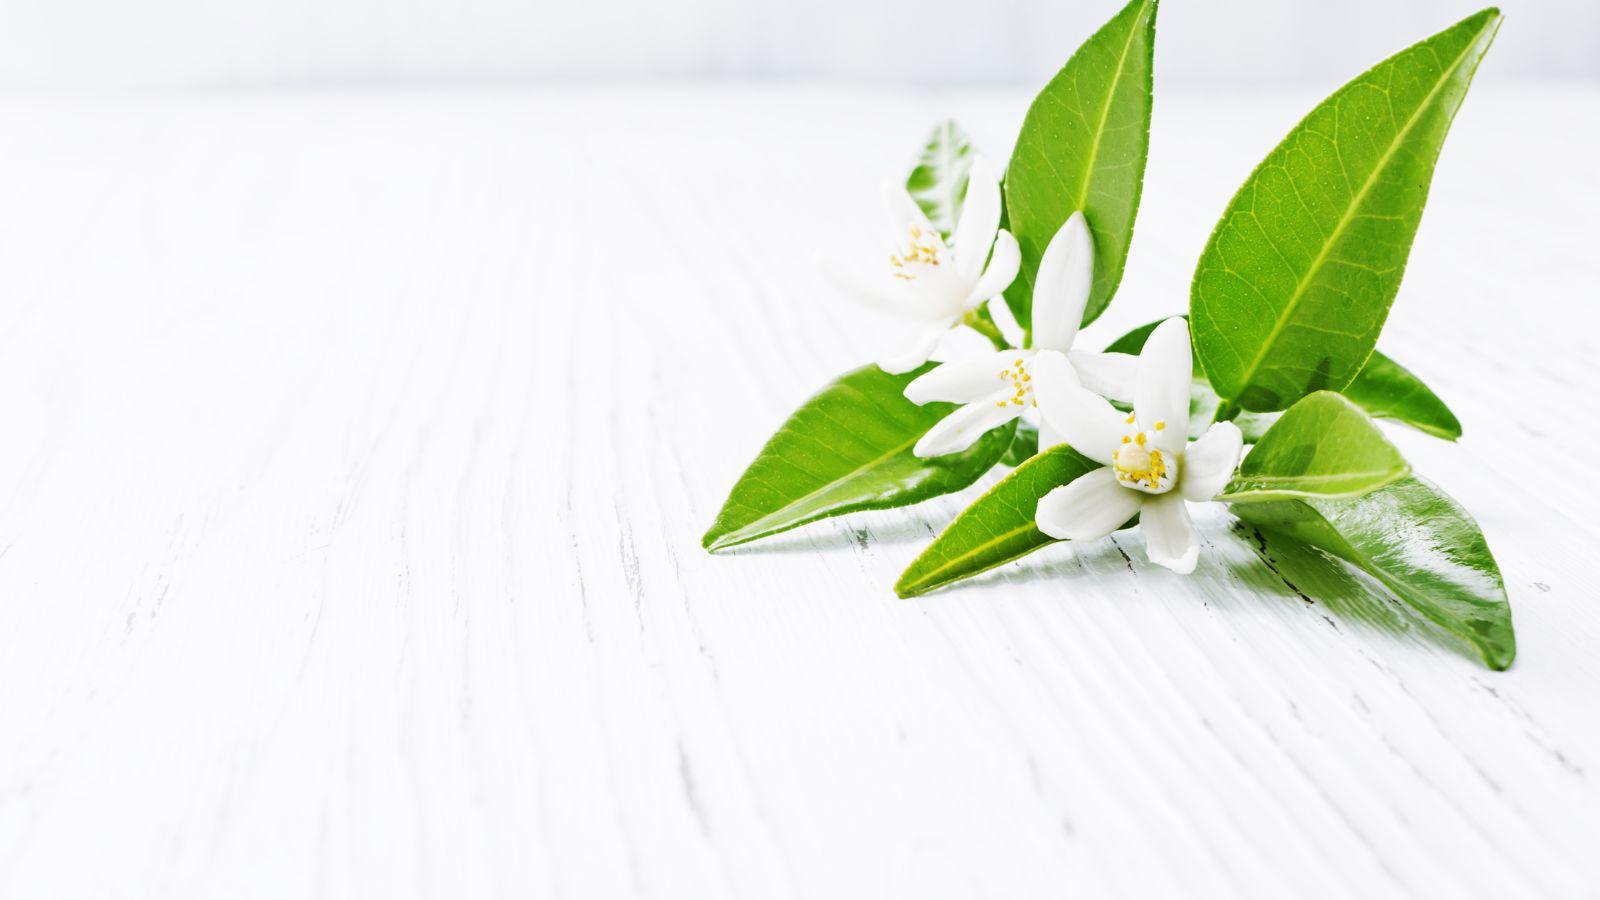 favourite essential oils neroli. image of a neroli clipping on a white background with green leaves and white flowers